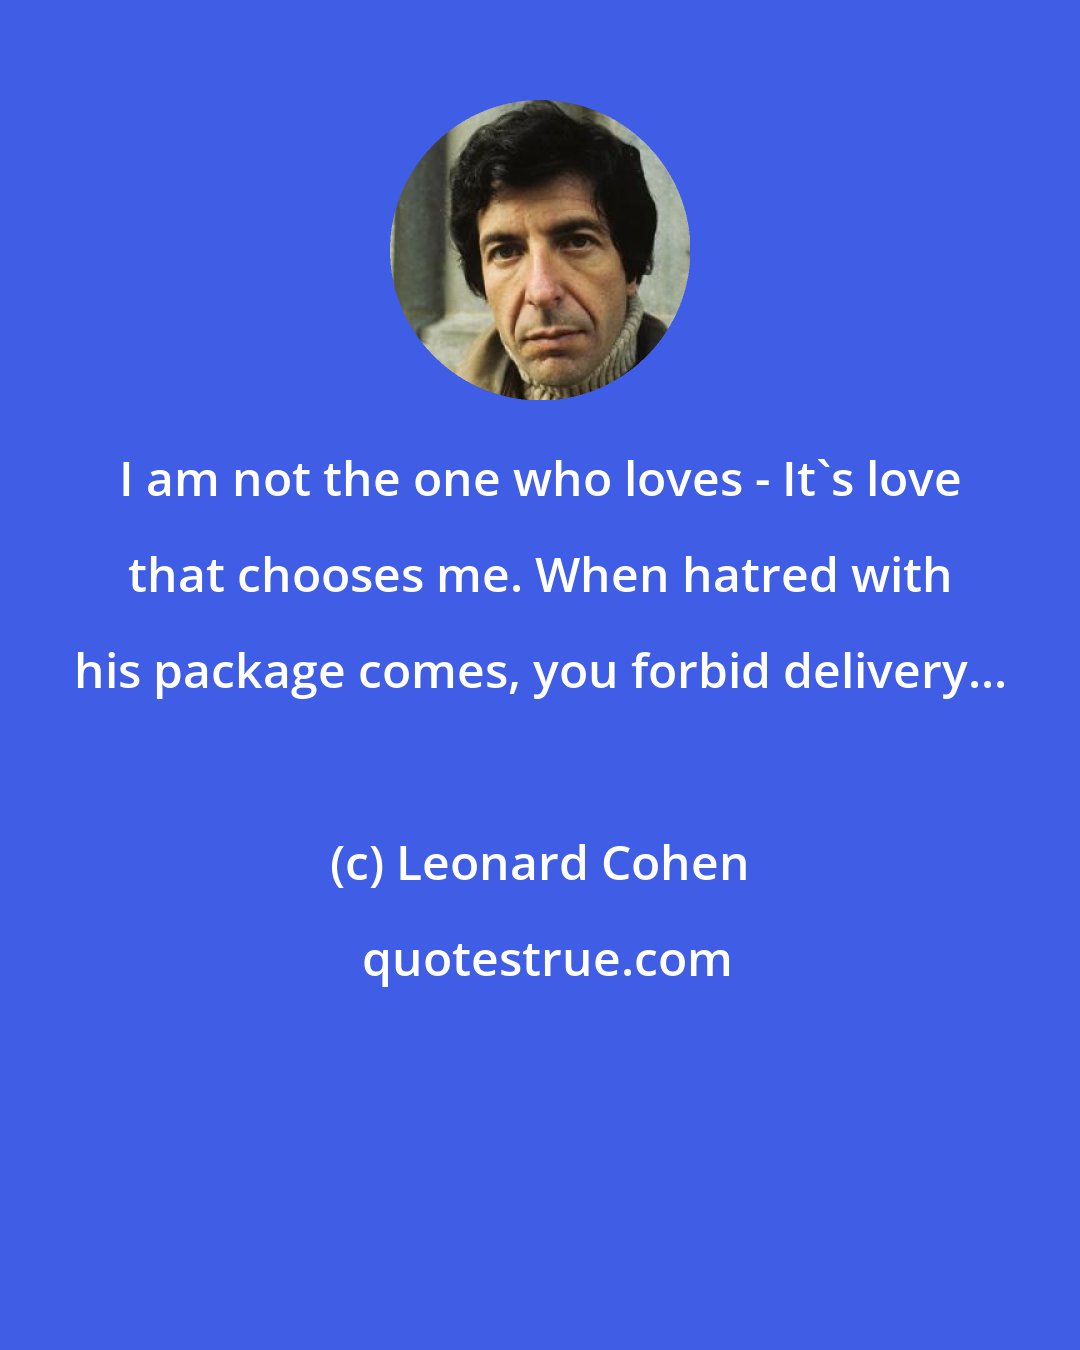 Leonard Cohen: I am not the one who loves - It's love that chooses me. When hatred with his package comes, you forbid delivery...